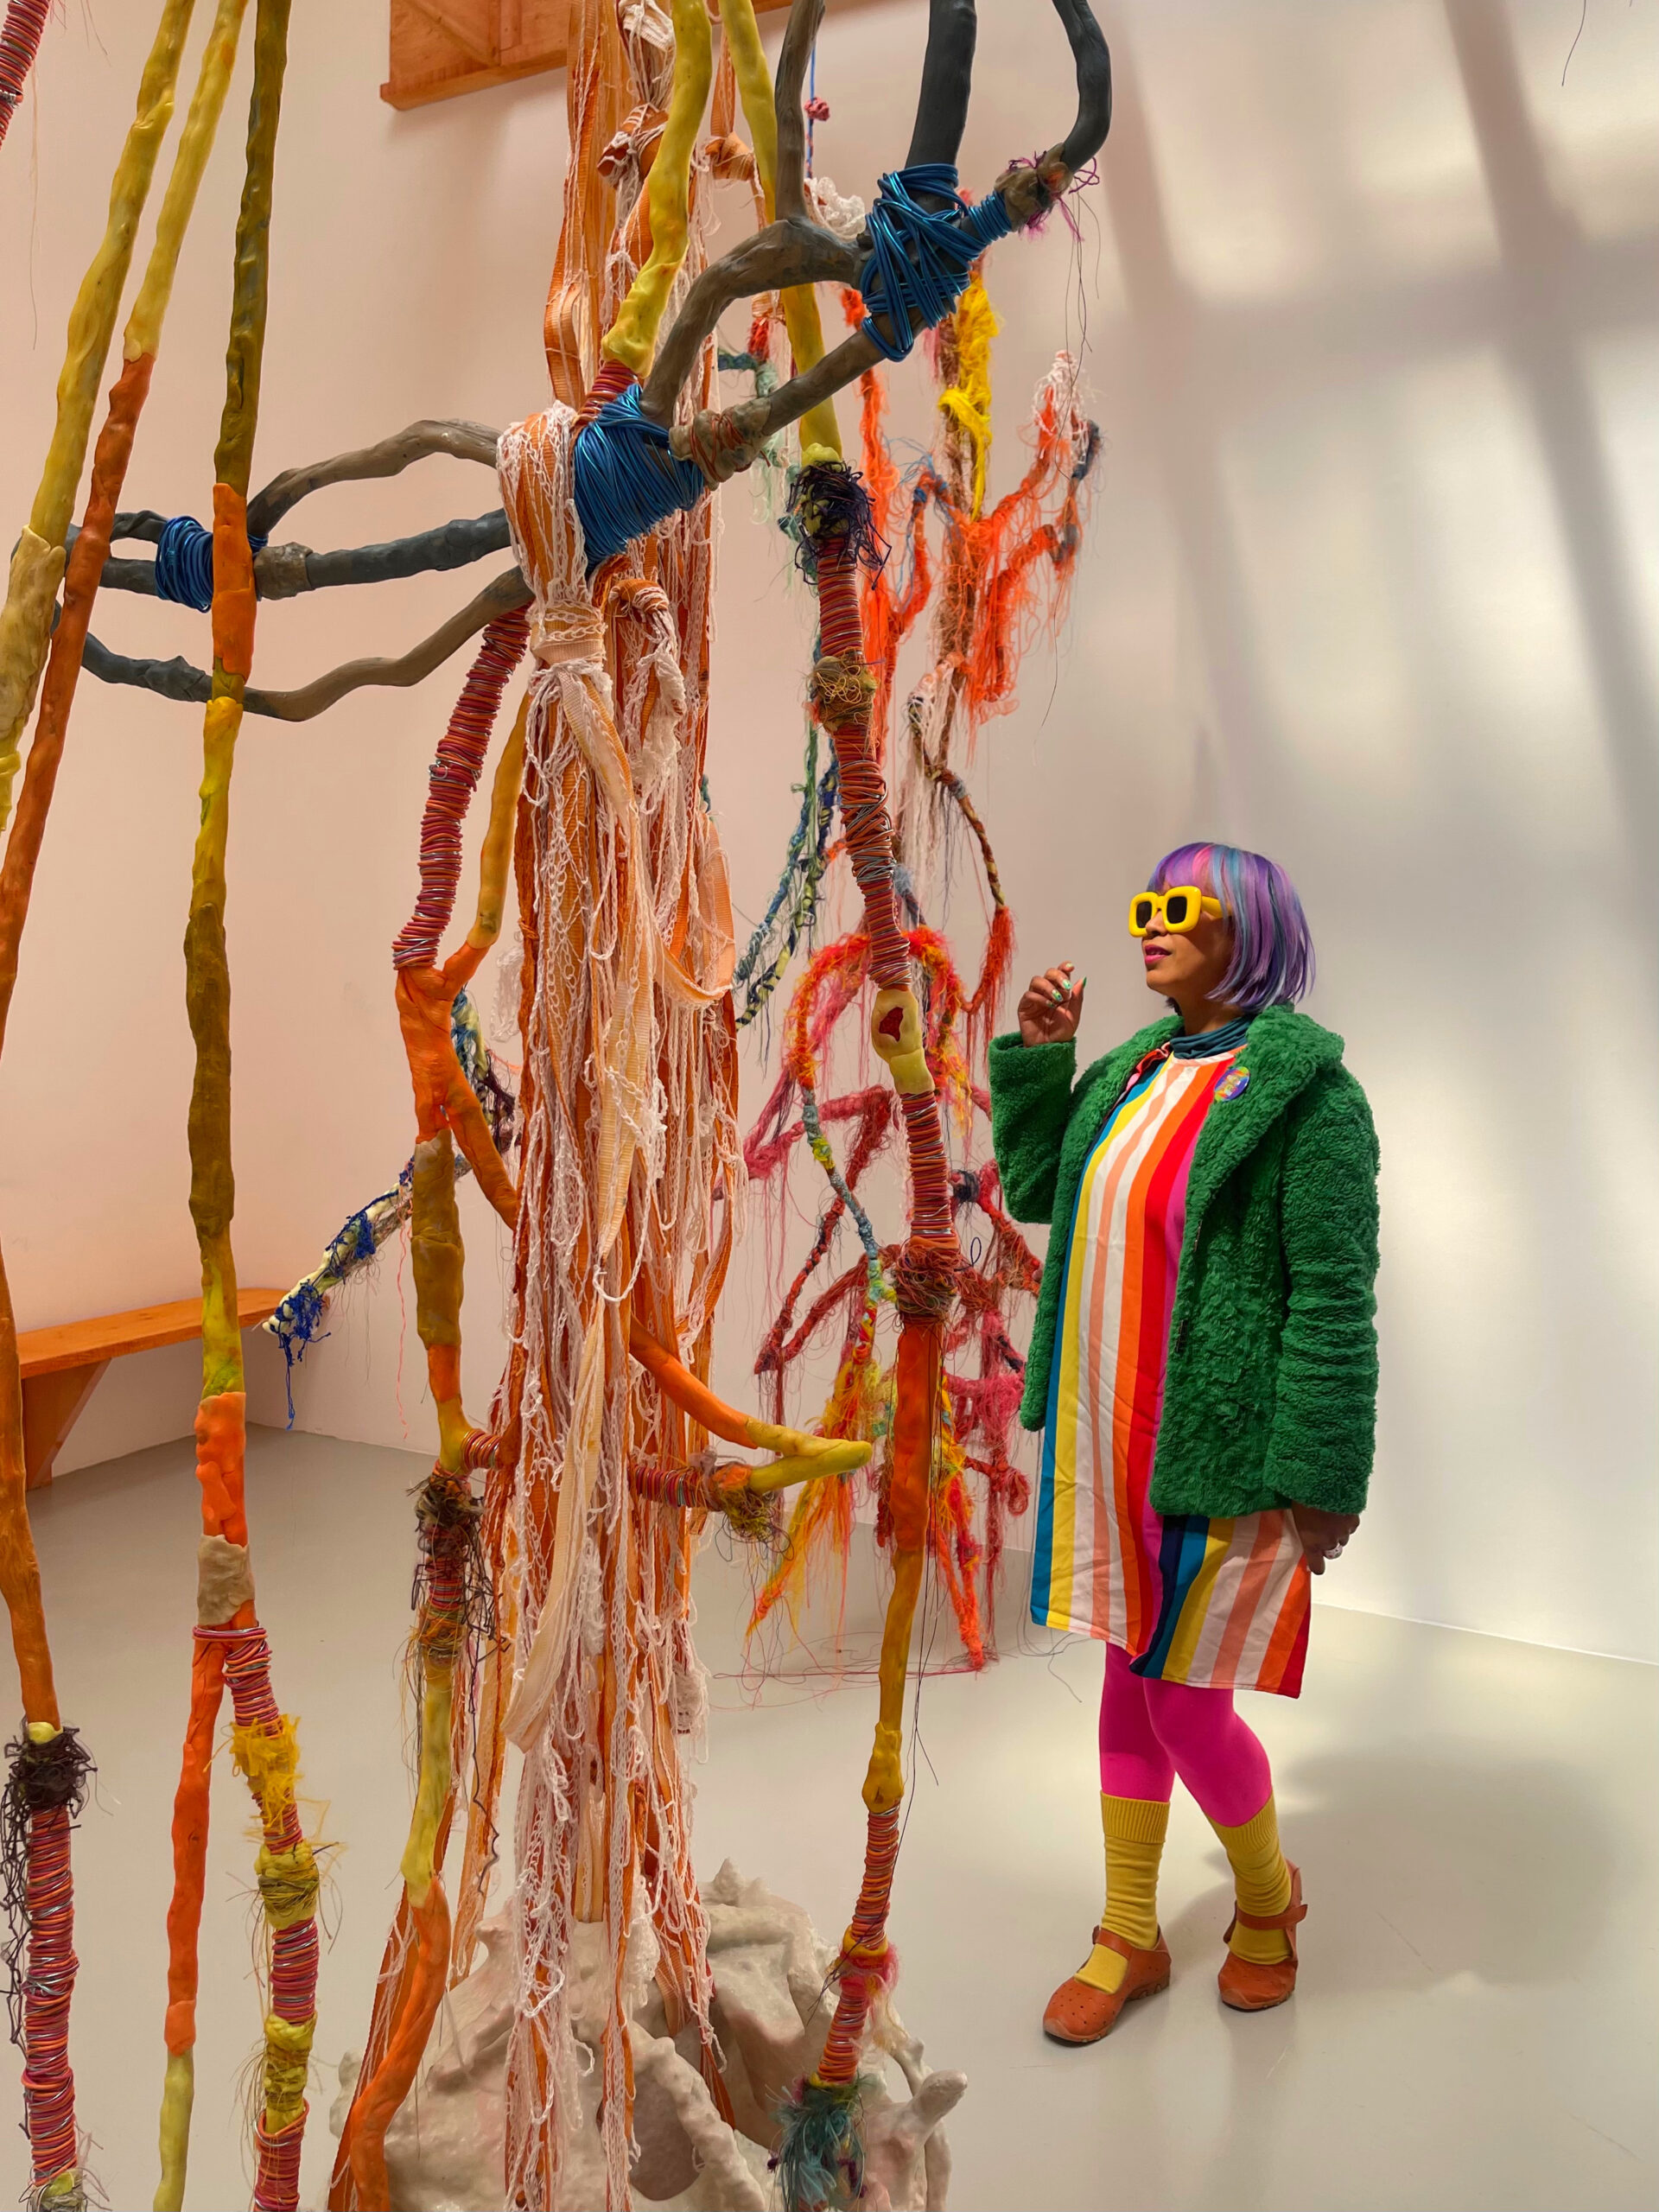 a series of what looks like branches of a tree covered in colourful wax and yarns in a white room, a girl in a green coat and yellow sunglasses looks up at it